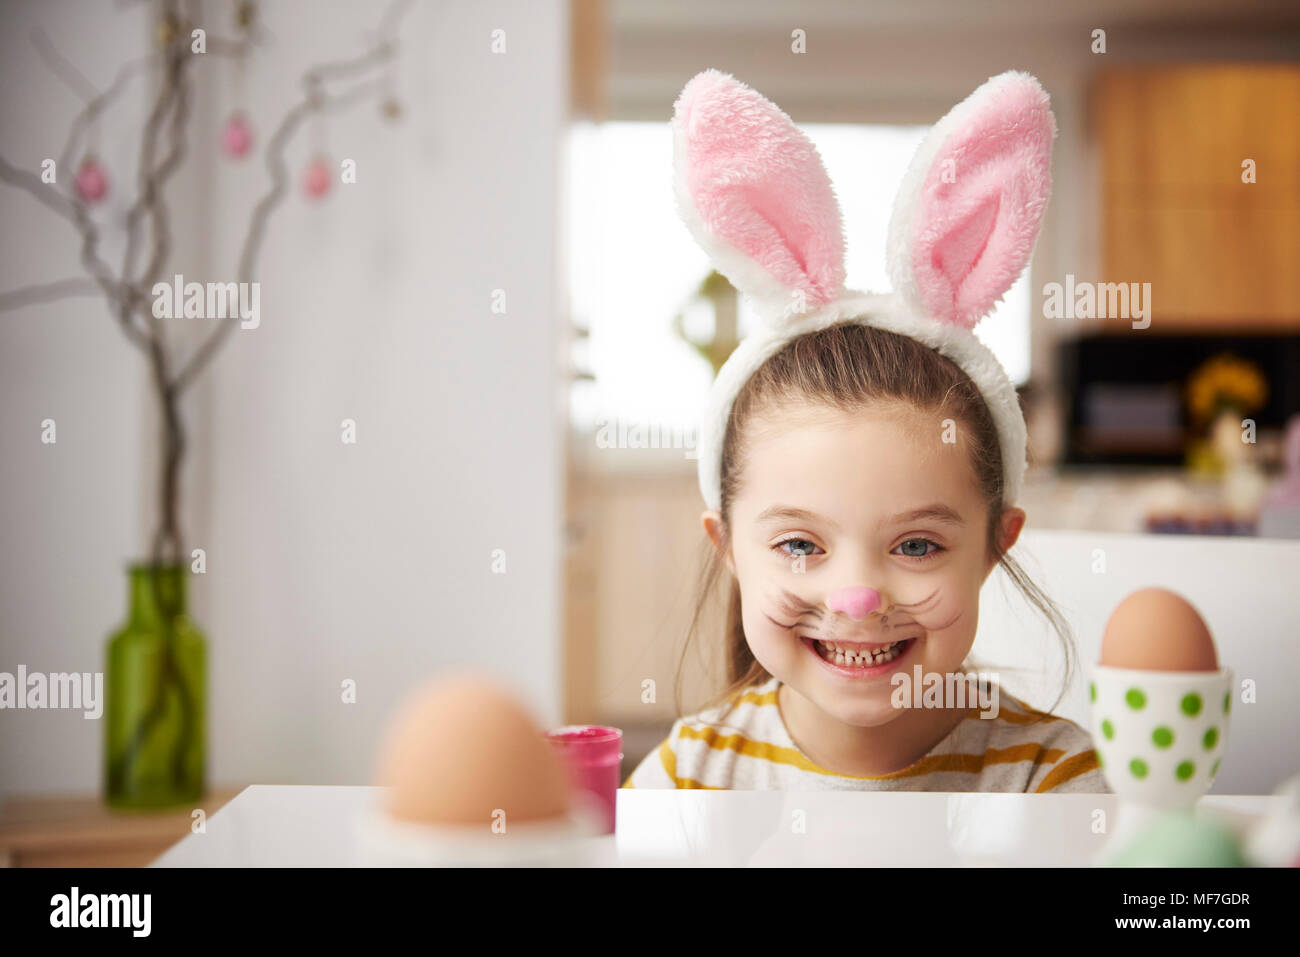 Portrait of smiling girl with bunny ears sitting at table with Easter eggs Stock Photo